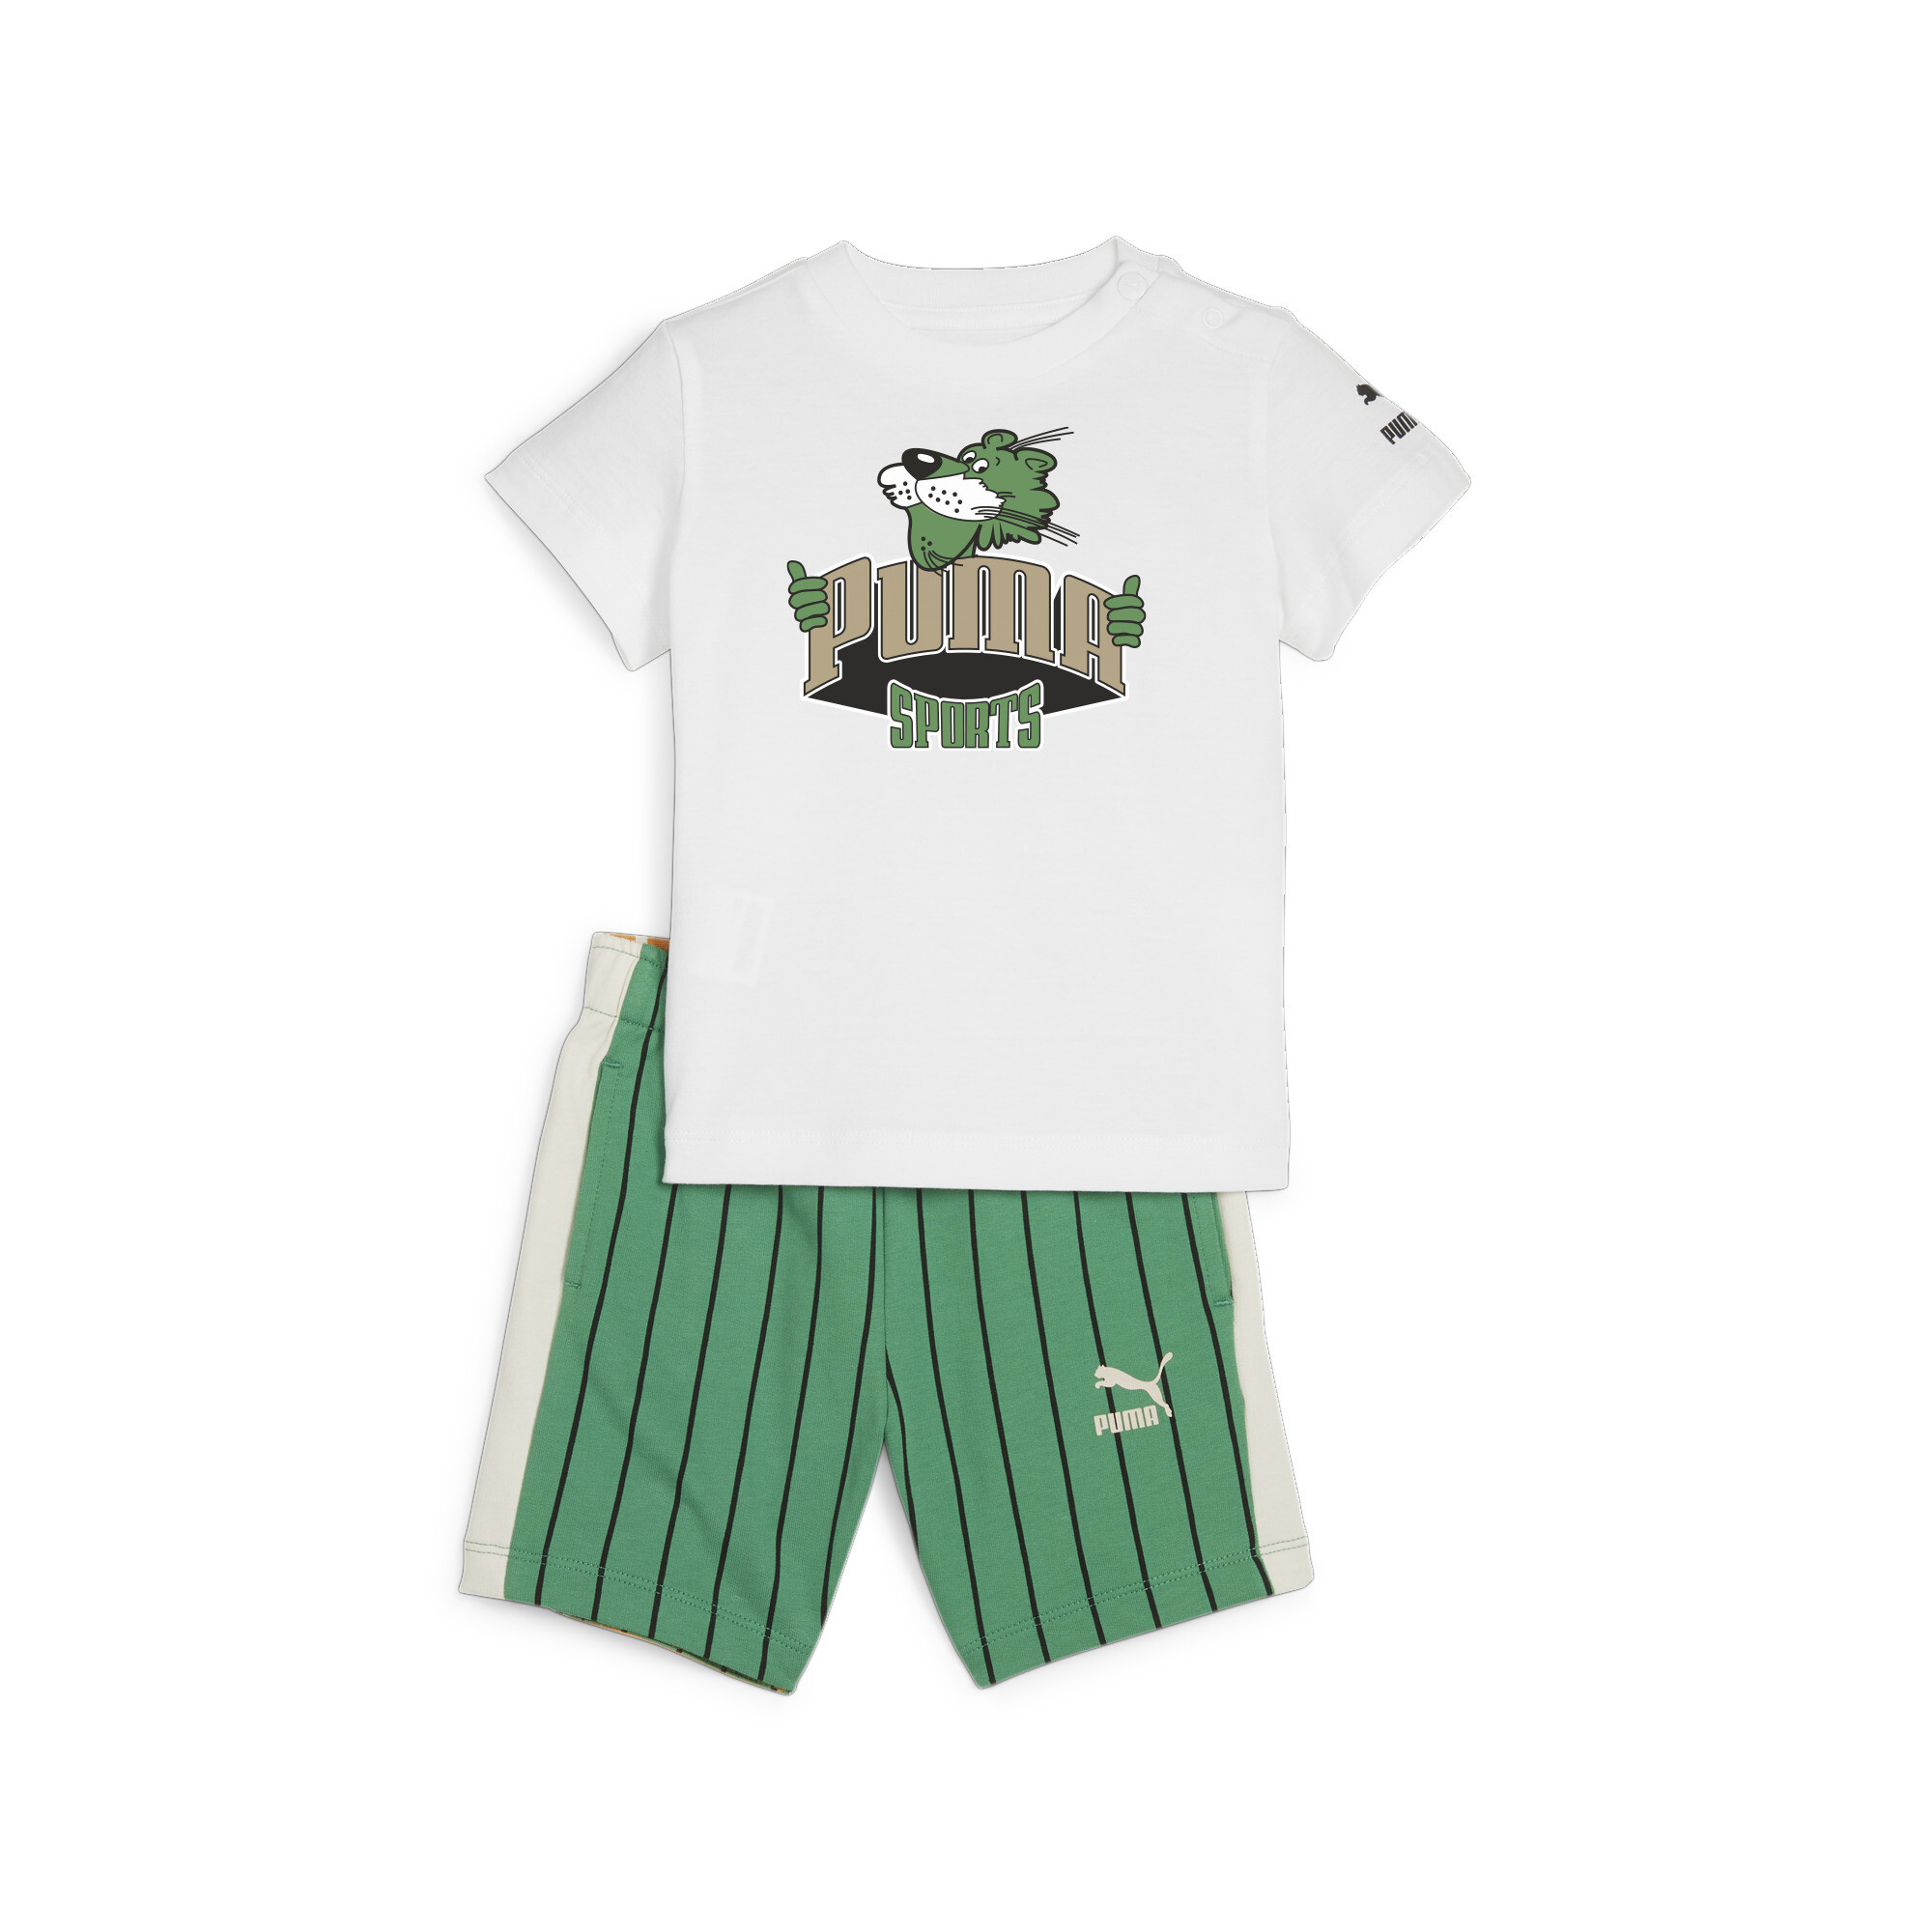 Kids' PUMA MINICATS FANBASE Toddlers' Set In White, Size 2-3 Months